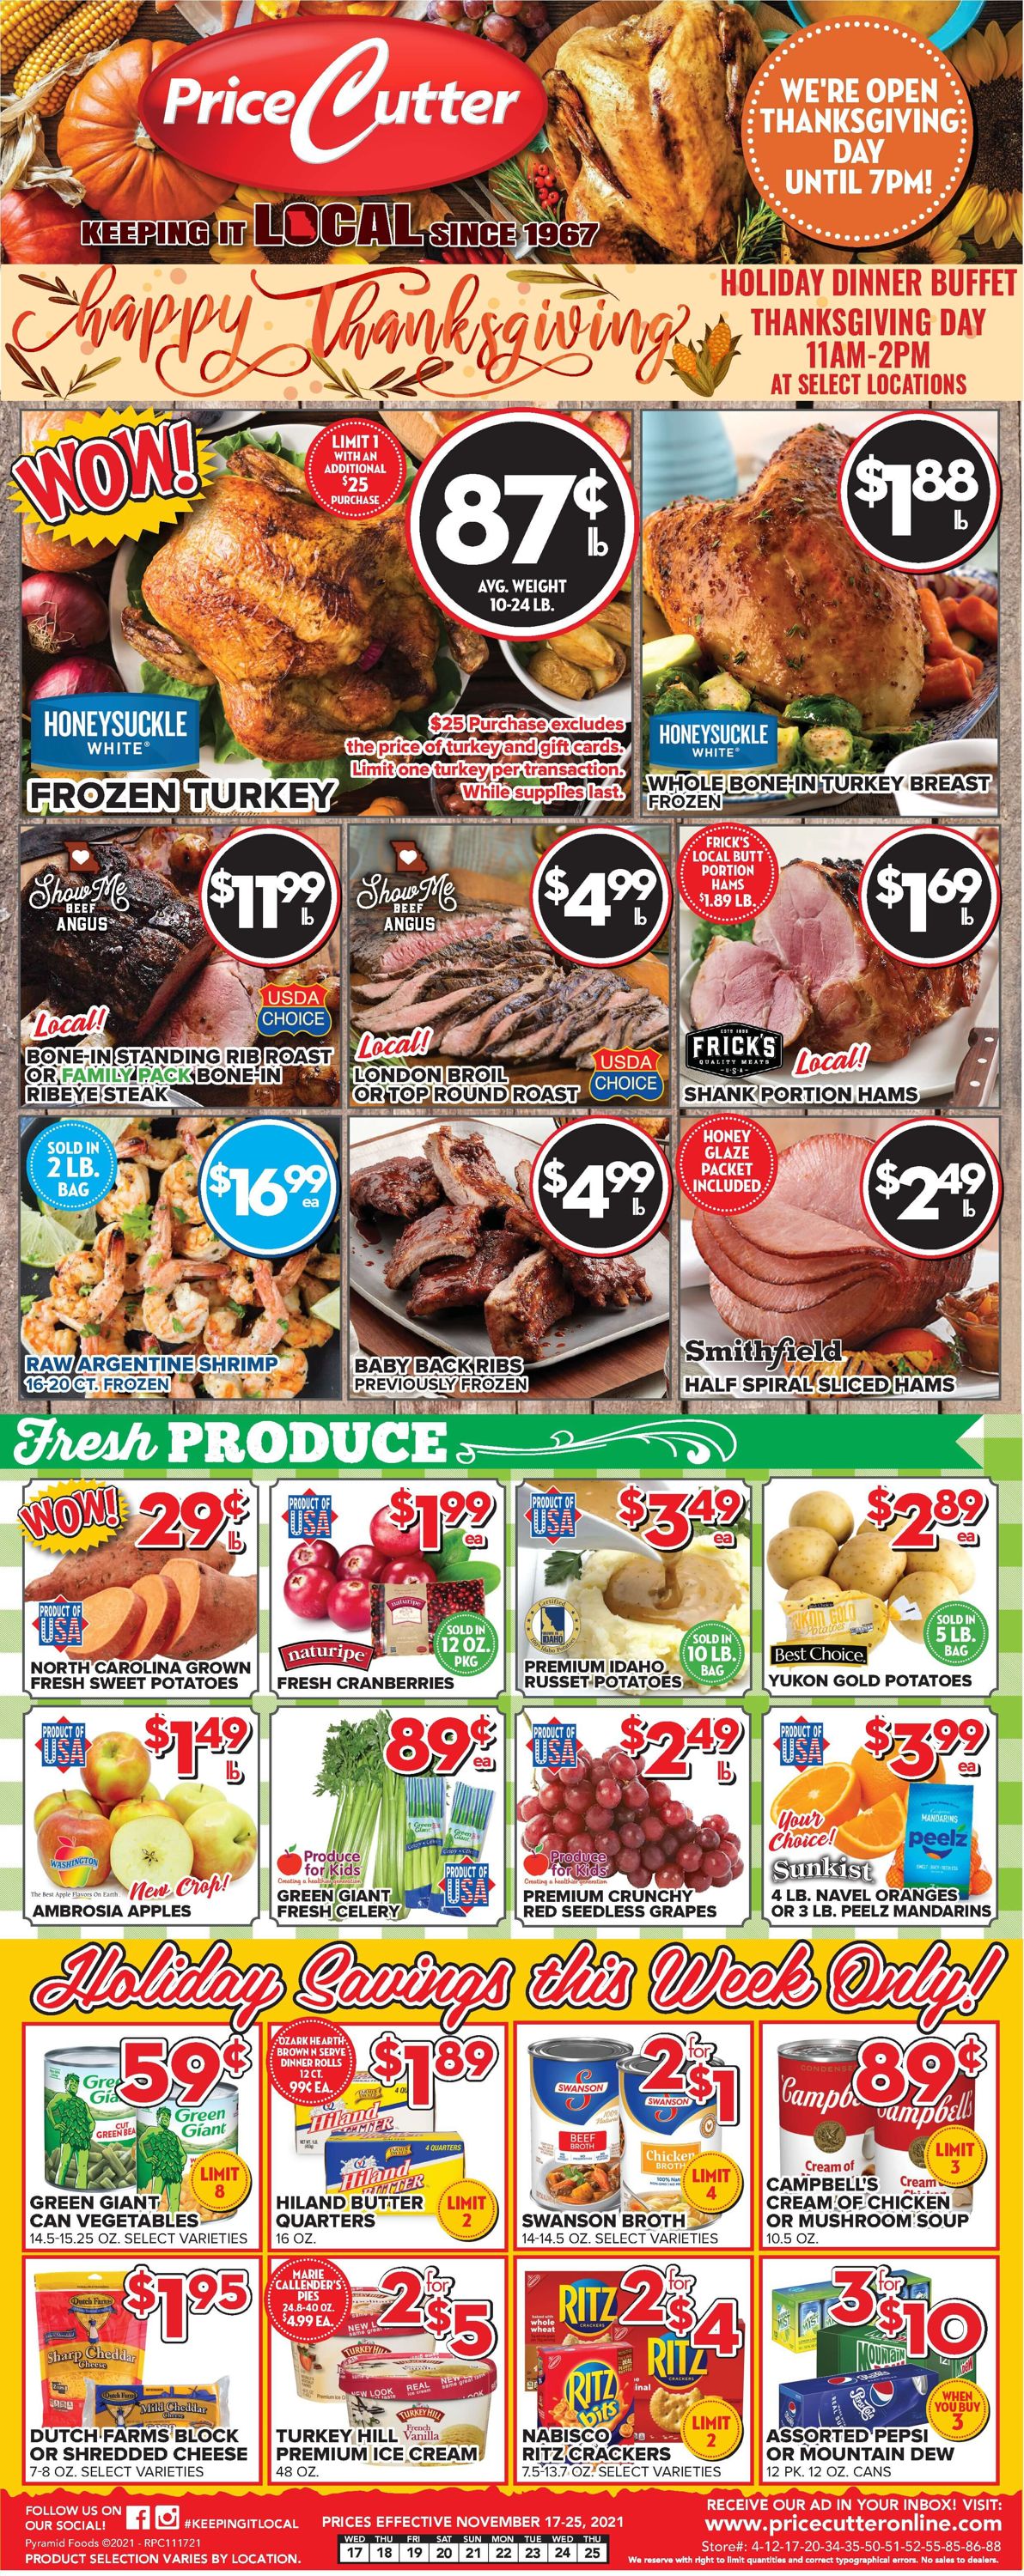 Price Cutter THANKSGIVING 2021 Weekly Ad Circular - valid 11/17-11/25/2021